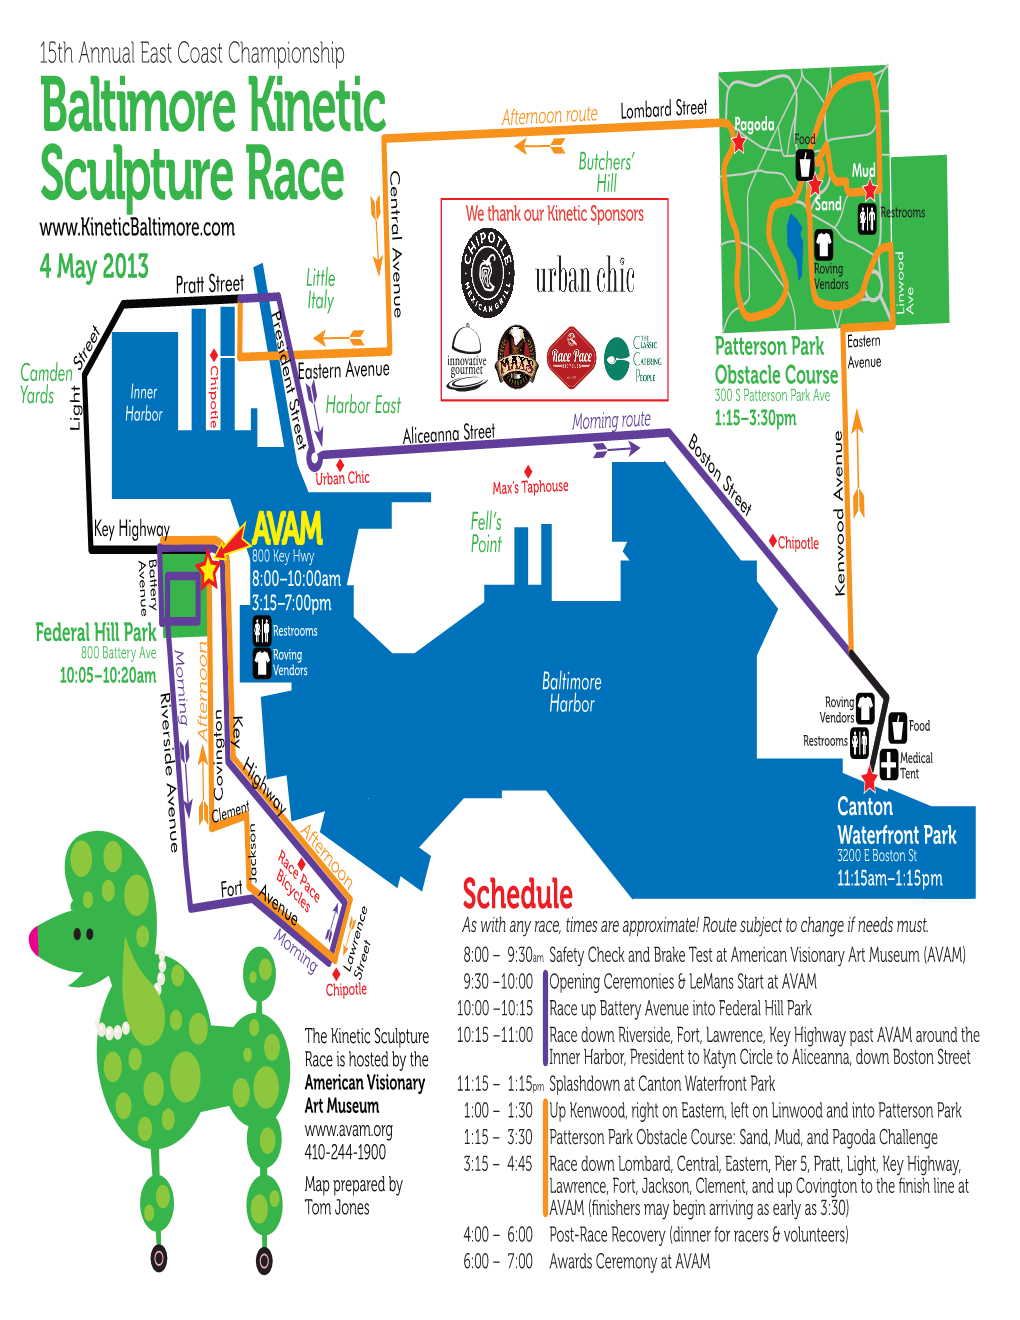 2013 Baltimore Kinetic Sculpture Race Spectator's Guide